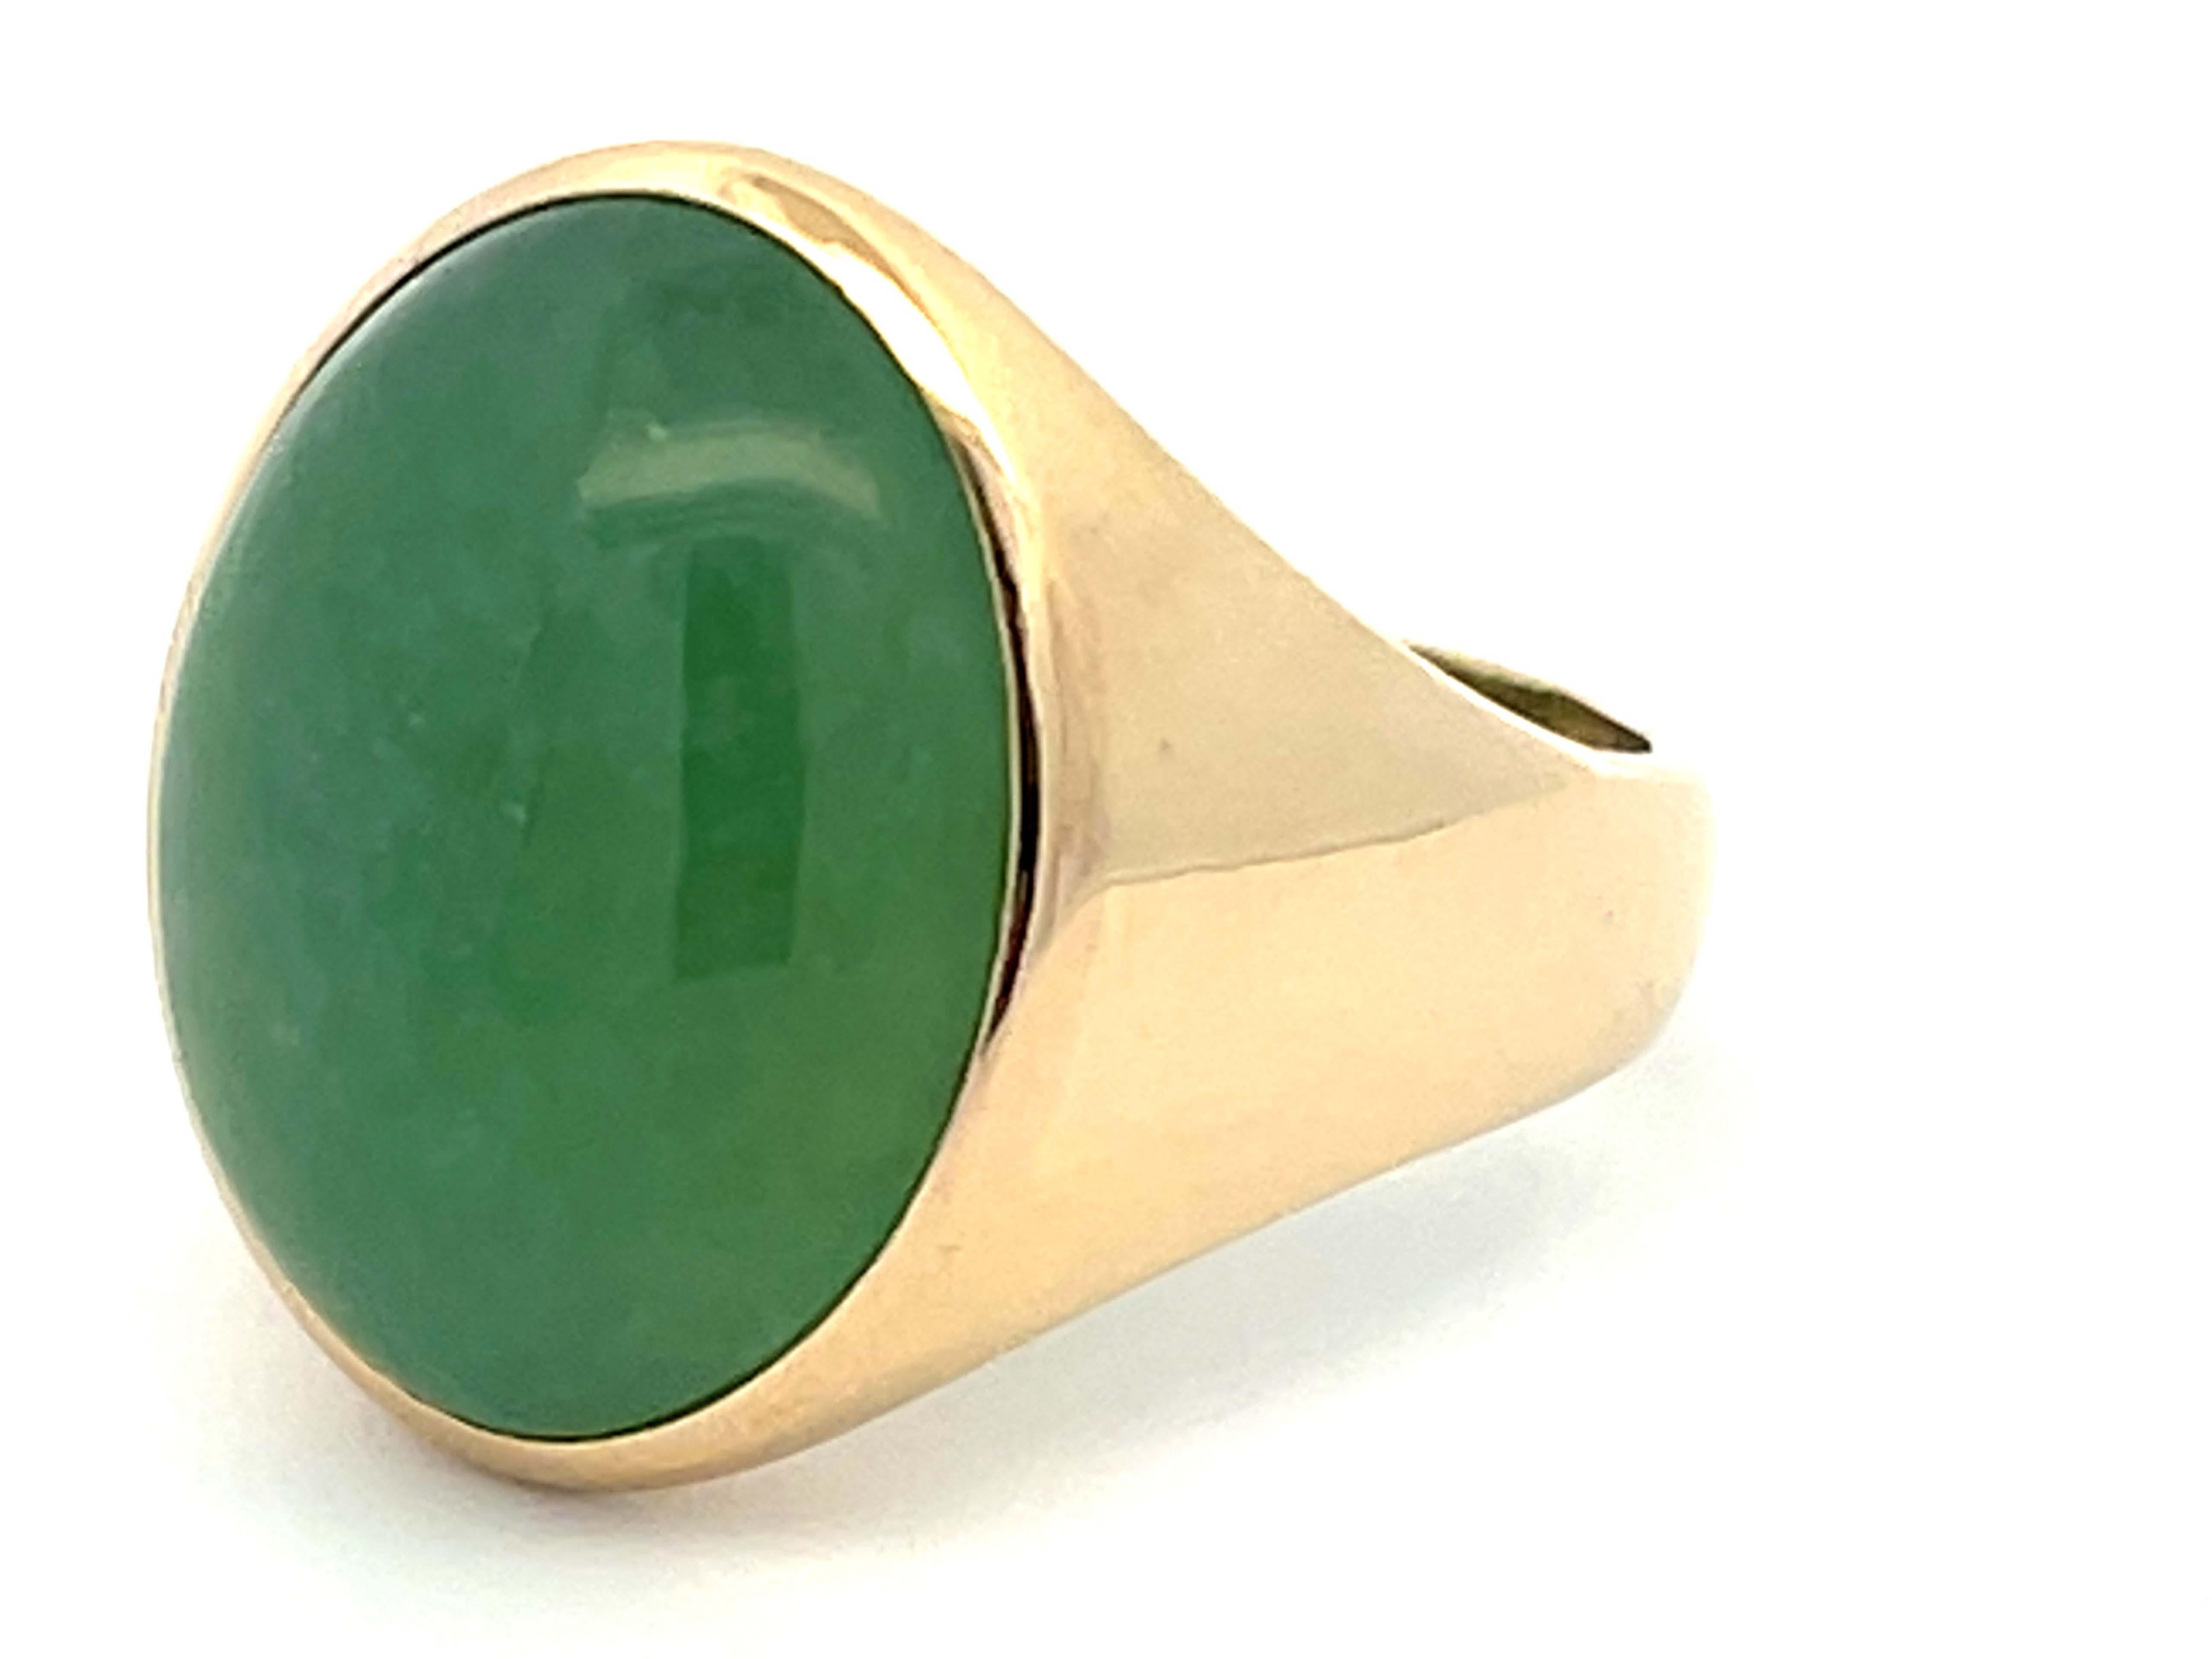 21 Carat Oval Cabochon Green Jade Ring in 14k Yellow Gold In Excellent Condition For Sale In Honolulu, HI